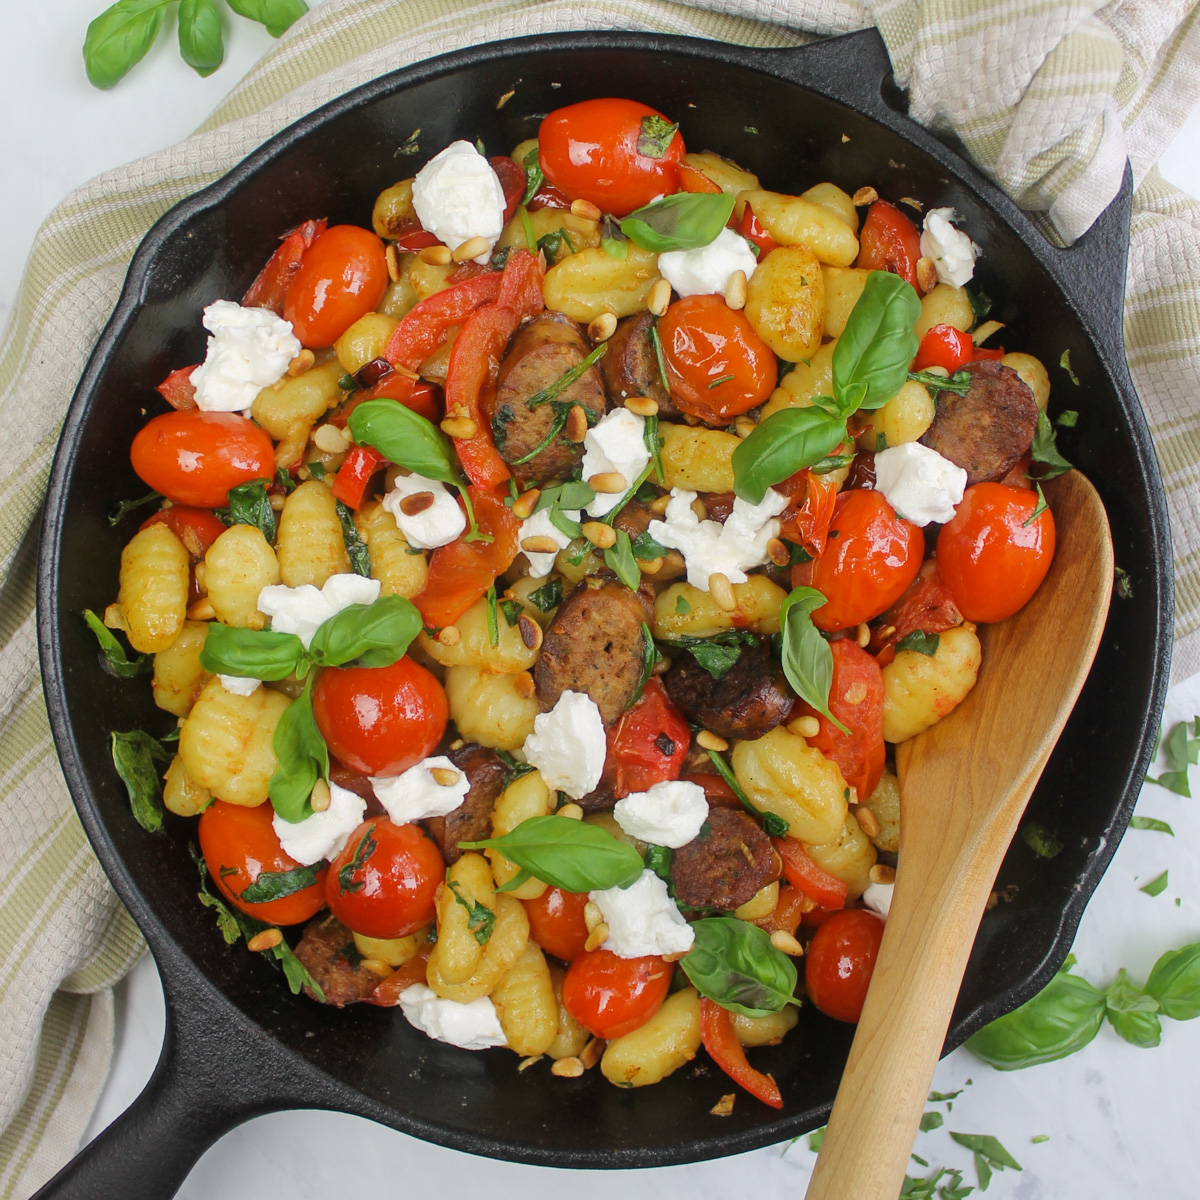 Italian Sausage Gnocchi with Spinach and Cherry Tomatoes